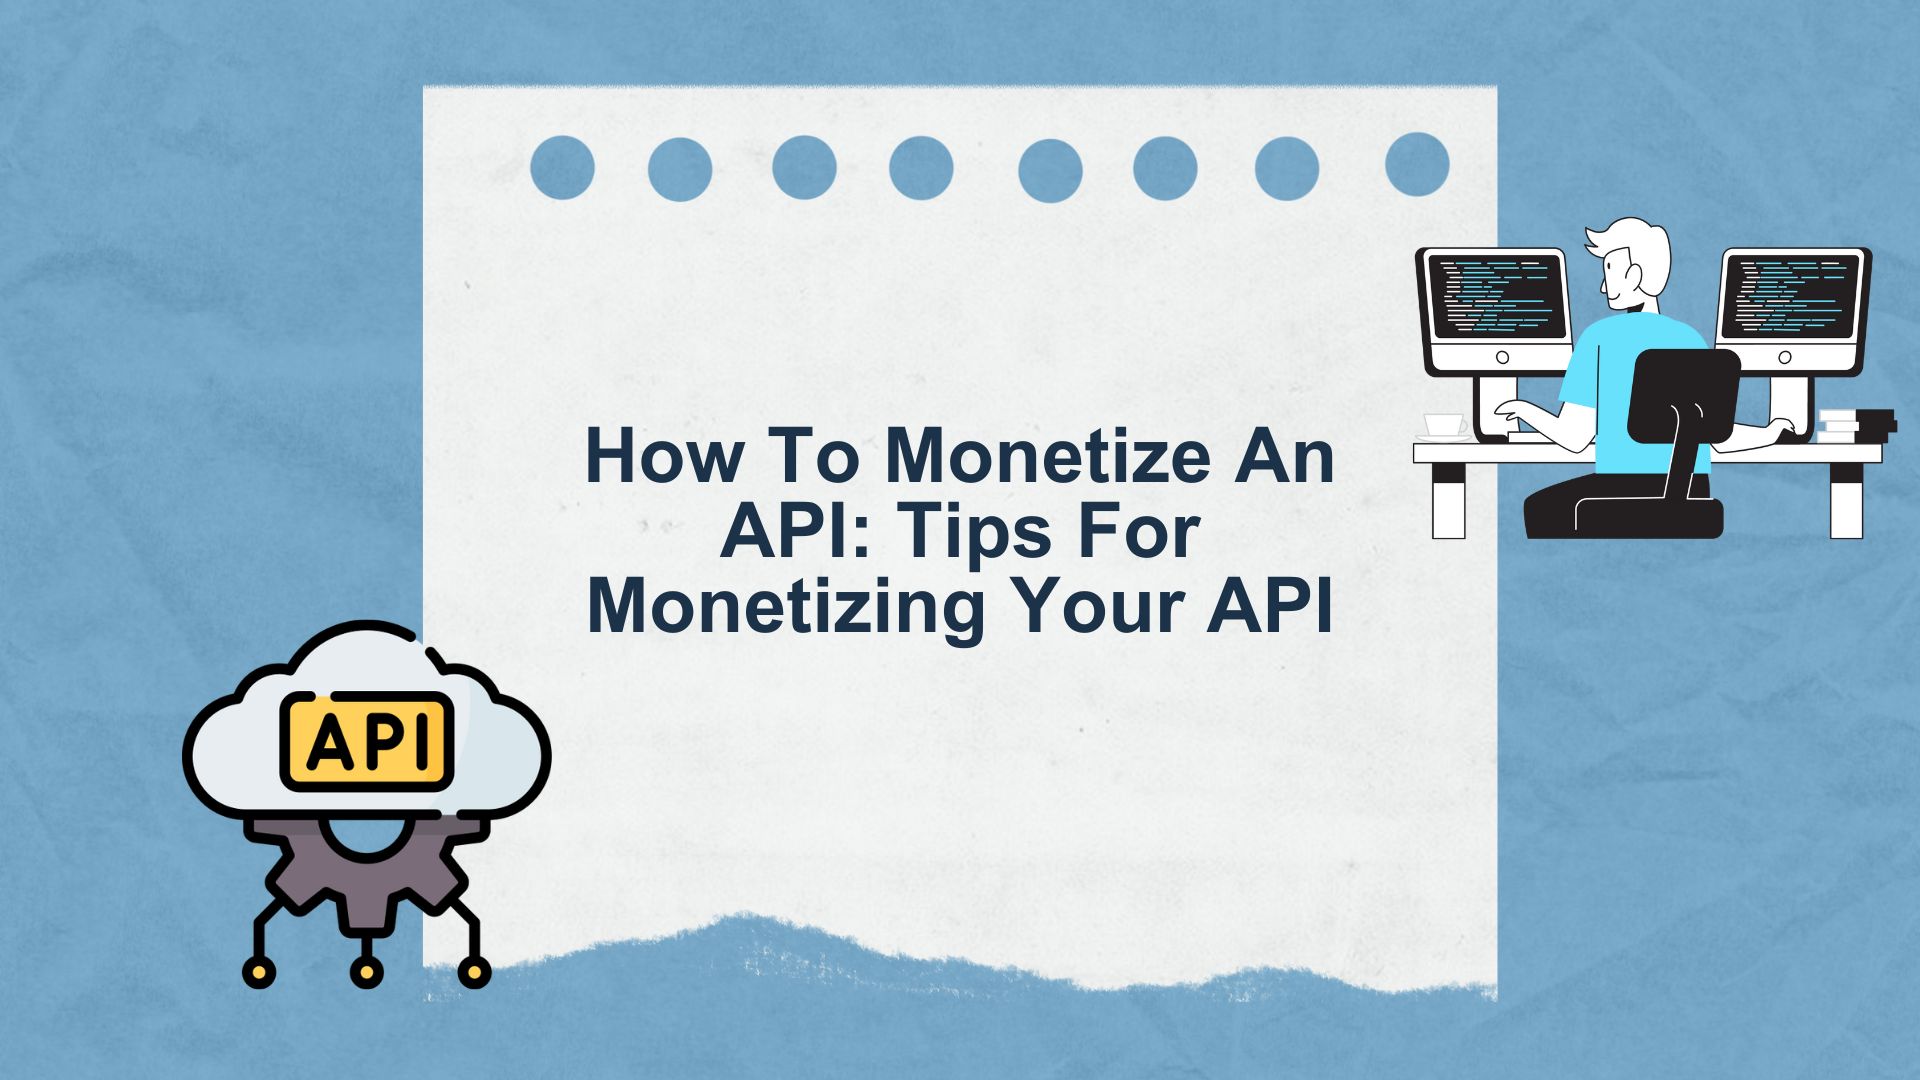 How To Monetize An API: Tips For Monetizing Your API